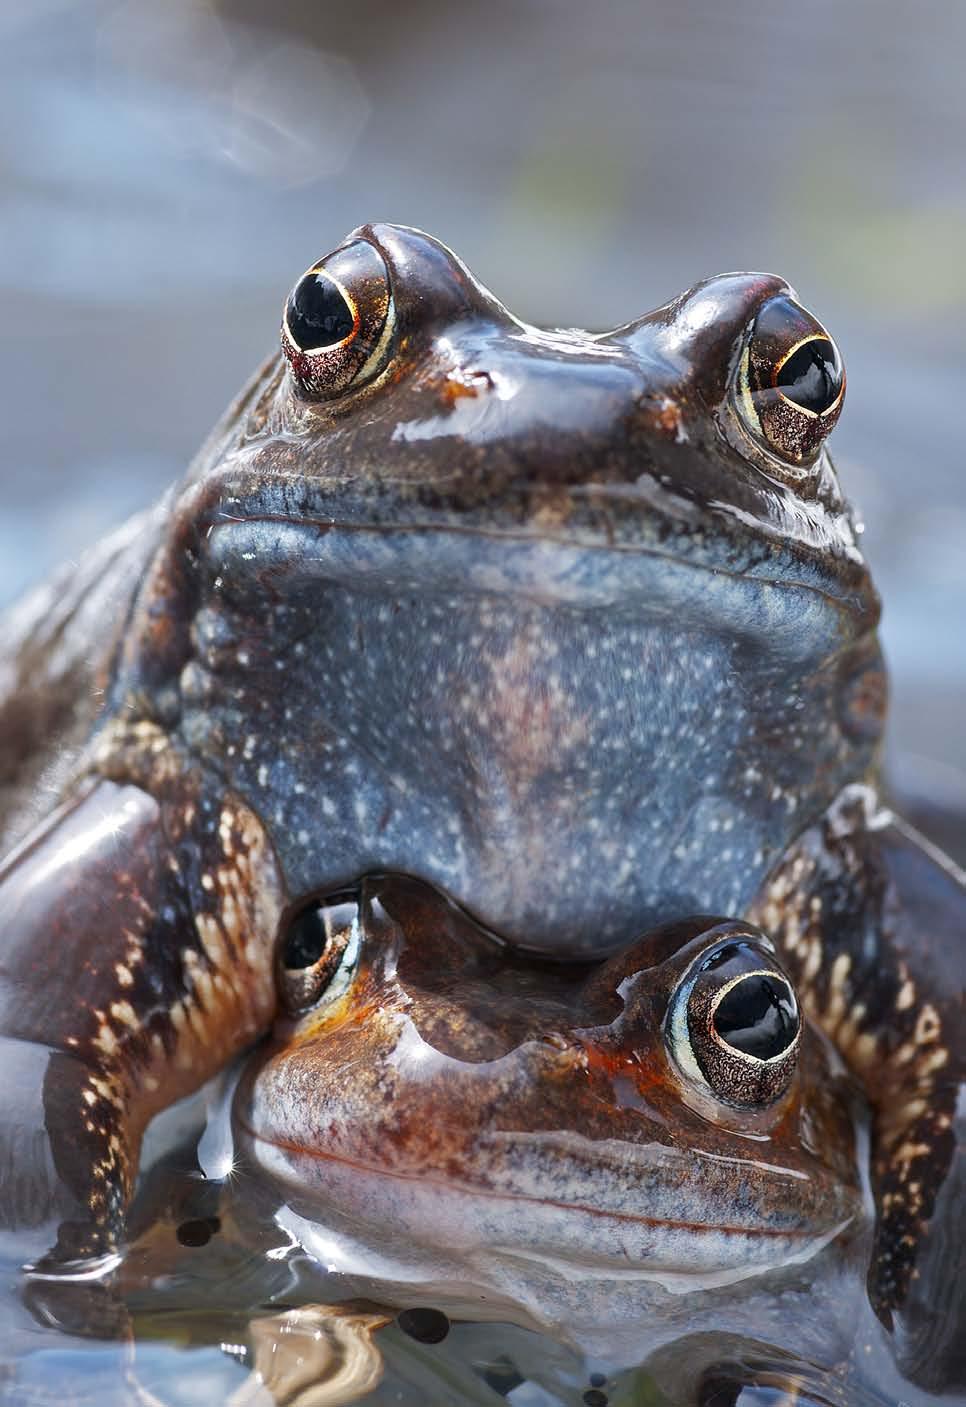 A close up portrait of a mating pair of Rana temporaria firmly locked in